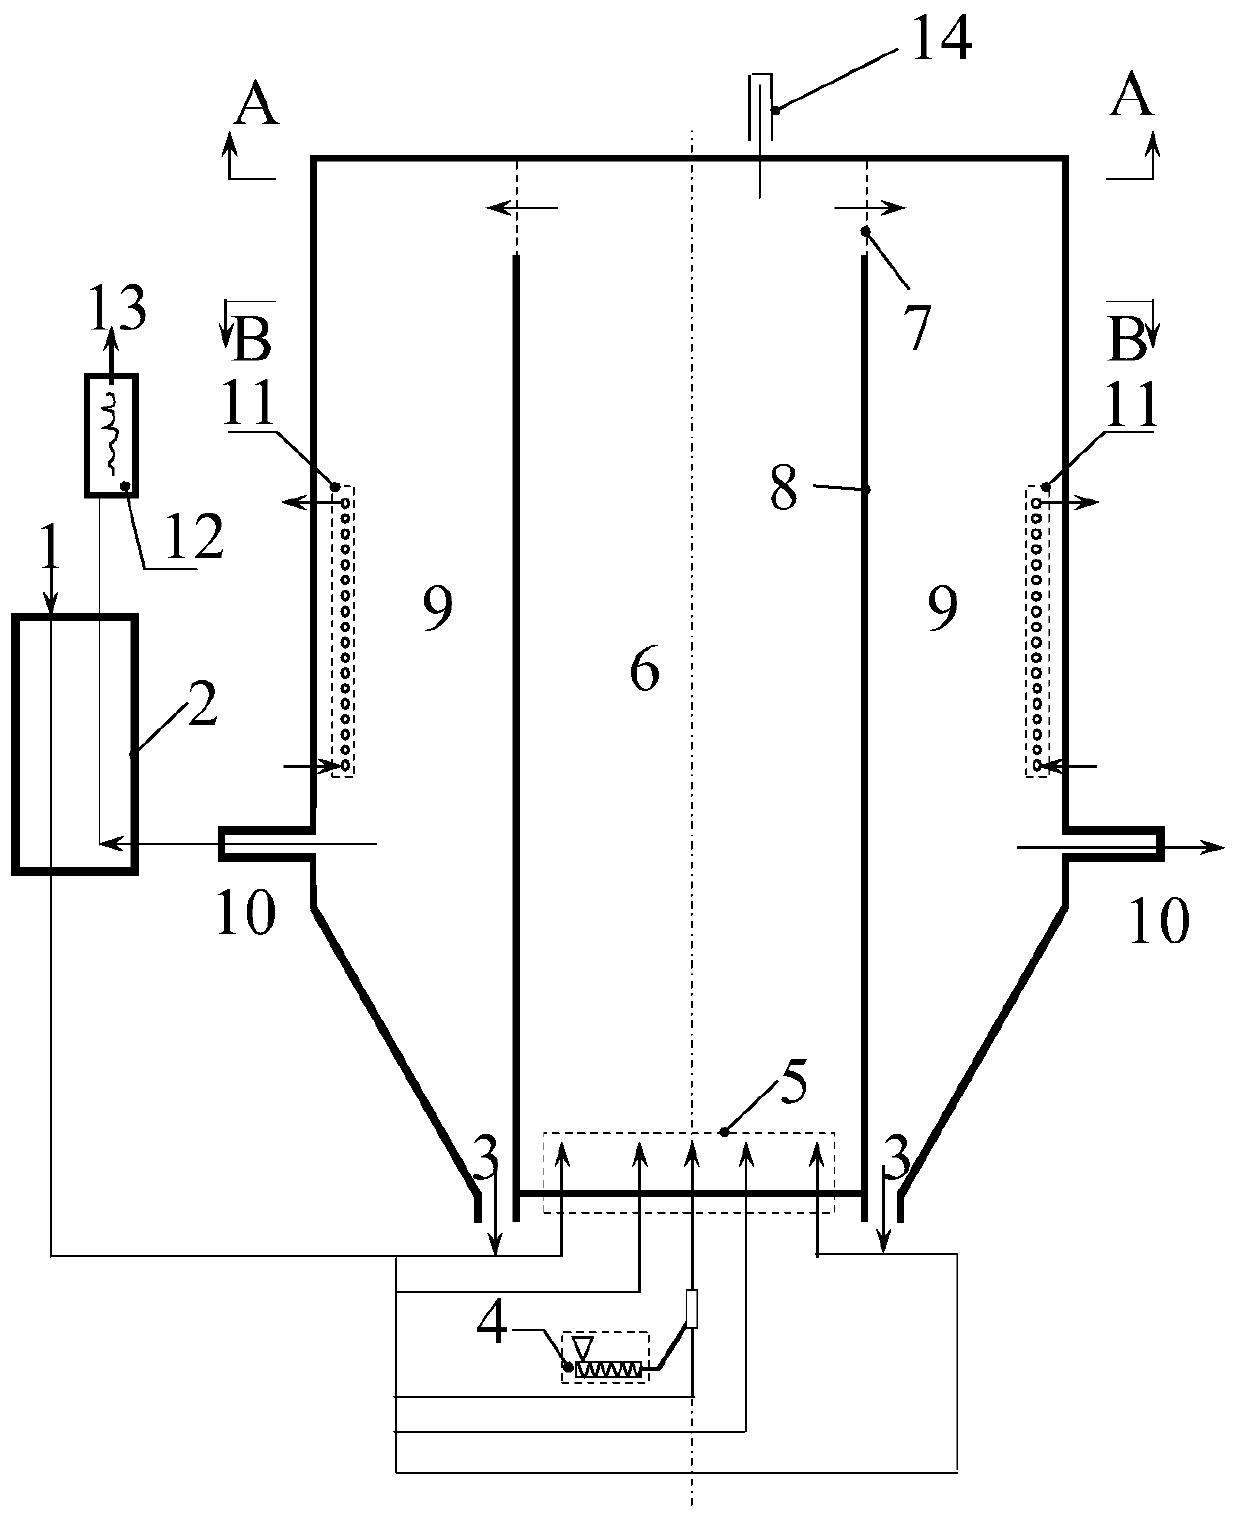 Flameless combustion system for semi-coke refractory fuel